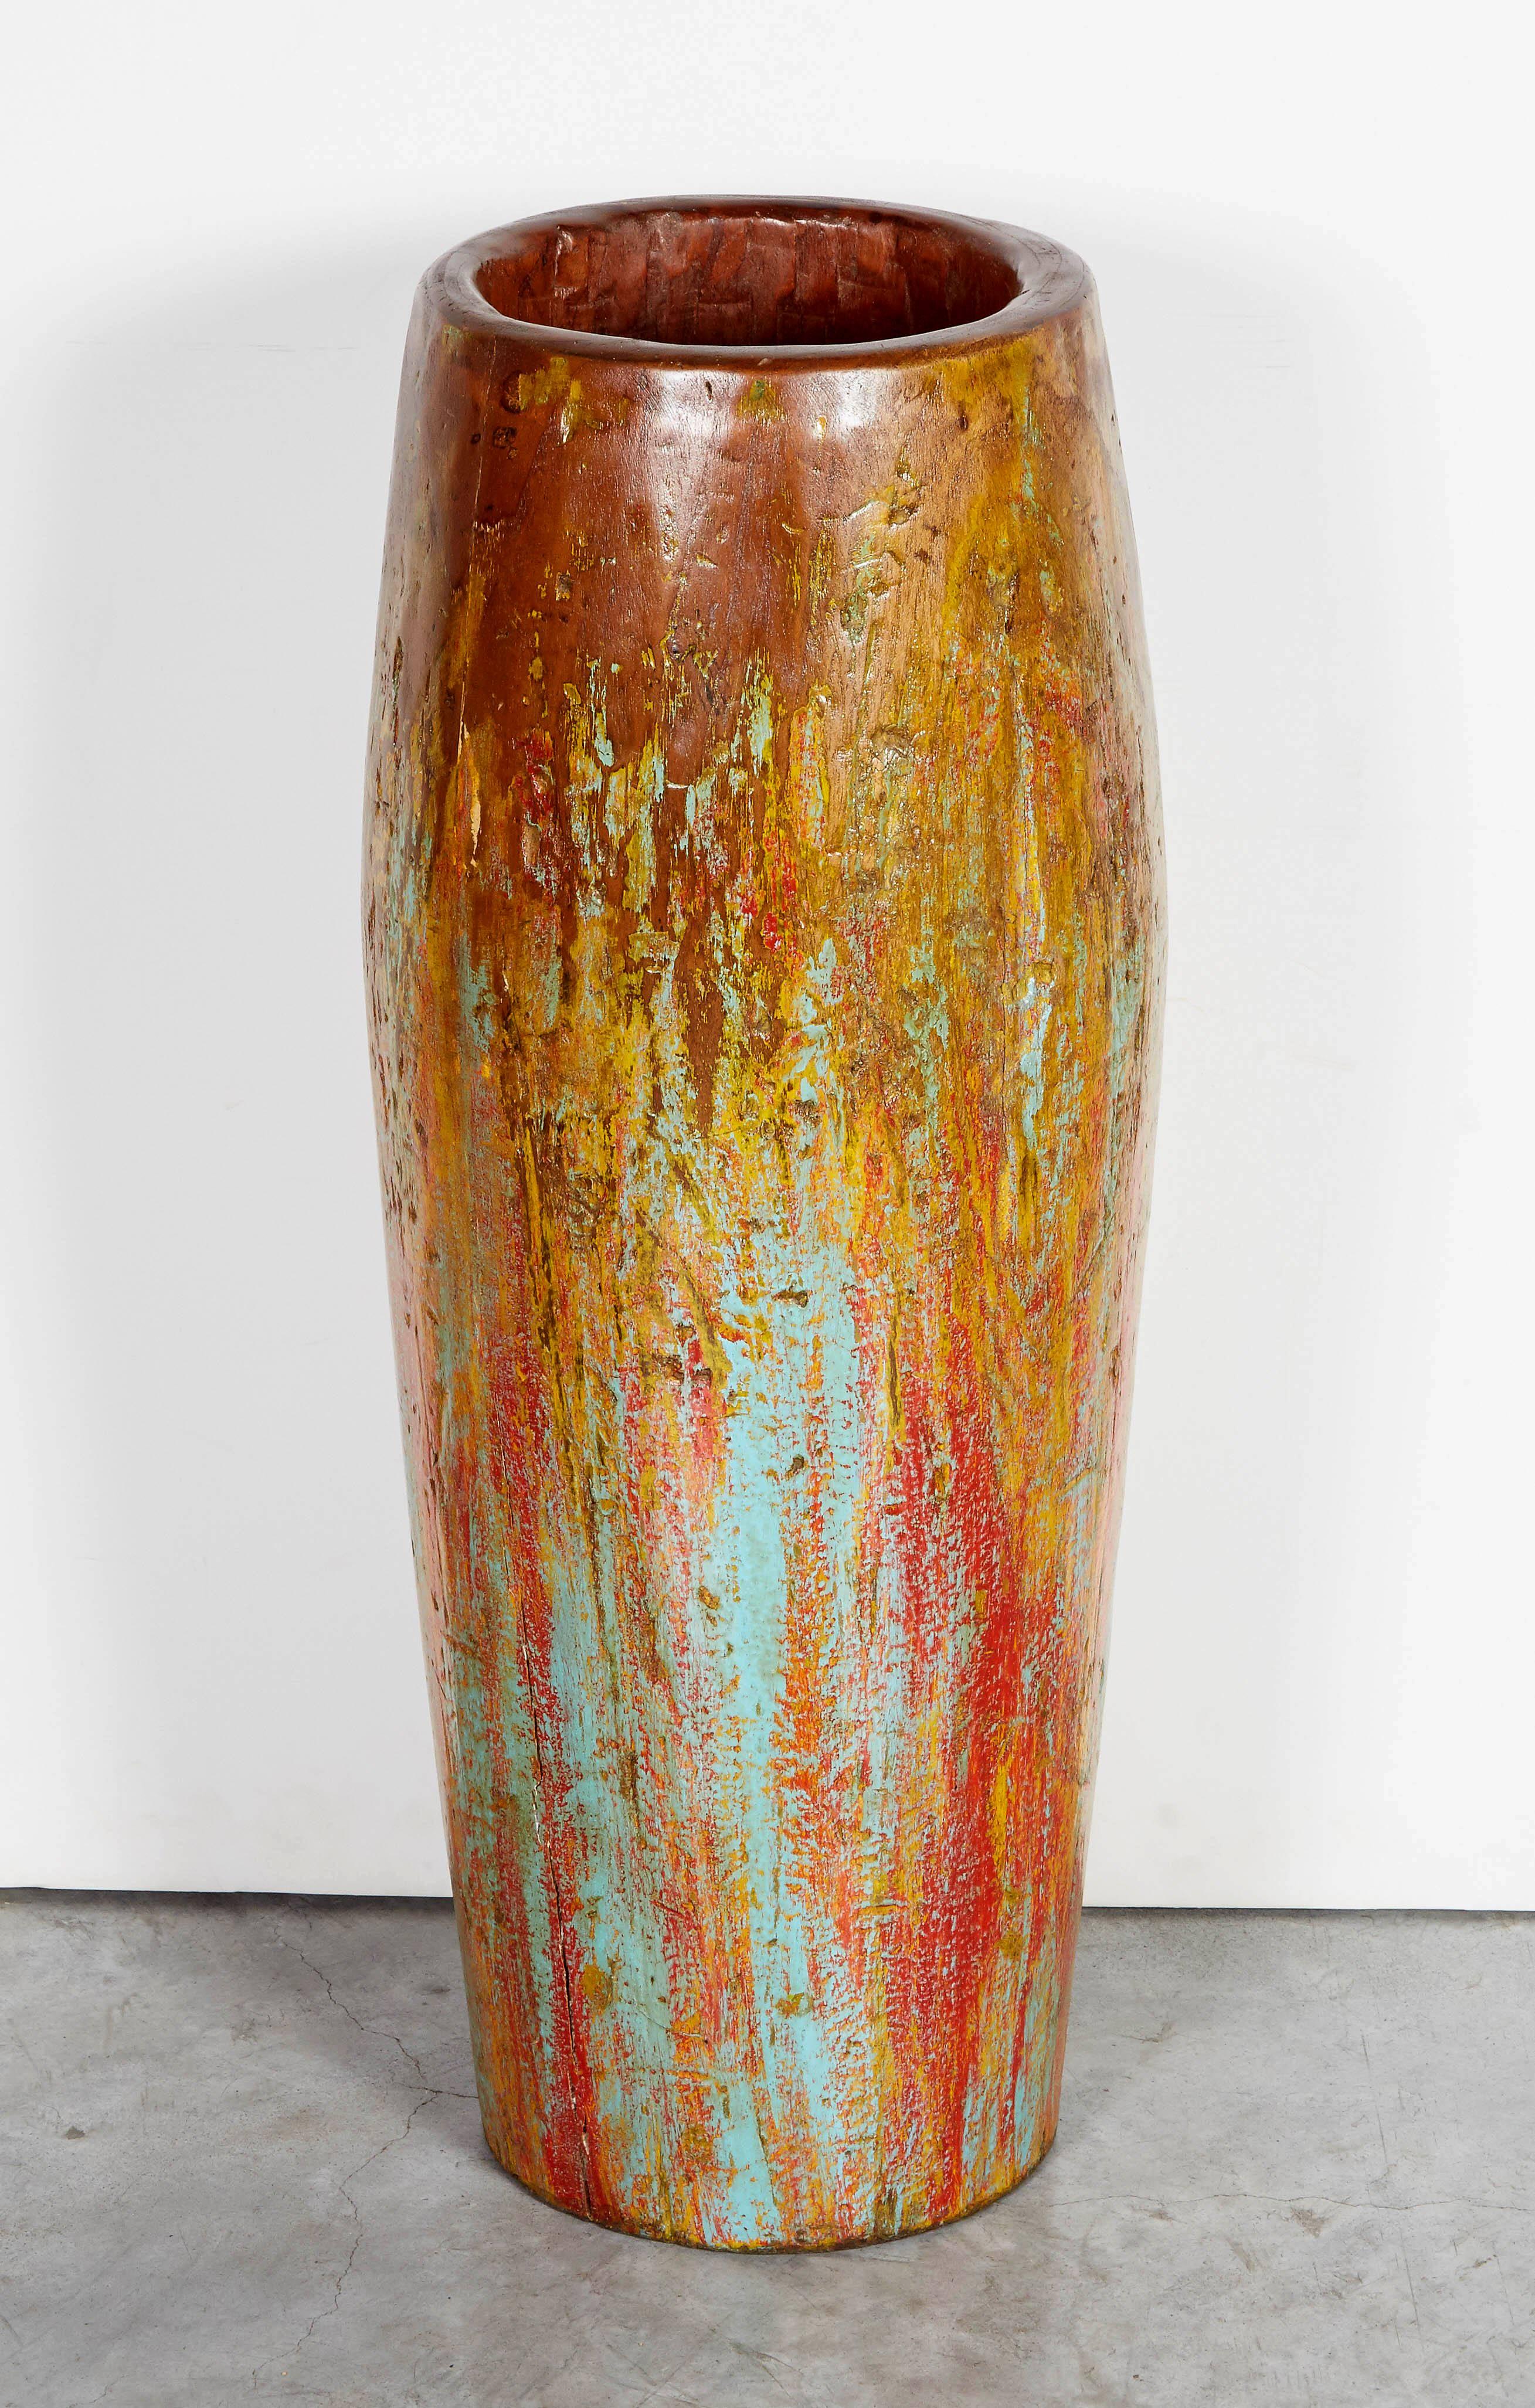 A tall, gracefully shaped and warmly colored vase made from a vintage drum base carved from a single piece of teak wood. From Java, Indonesia, circa 1950.
M2016.